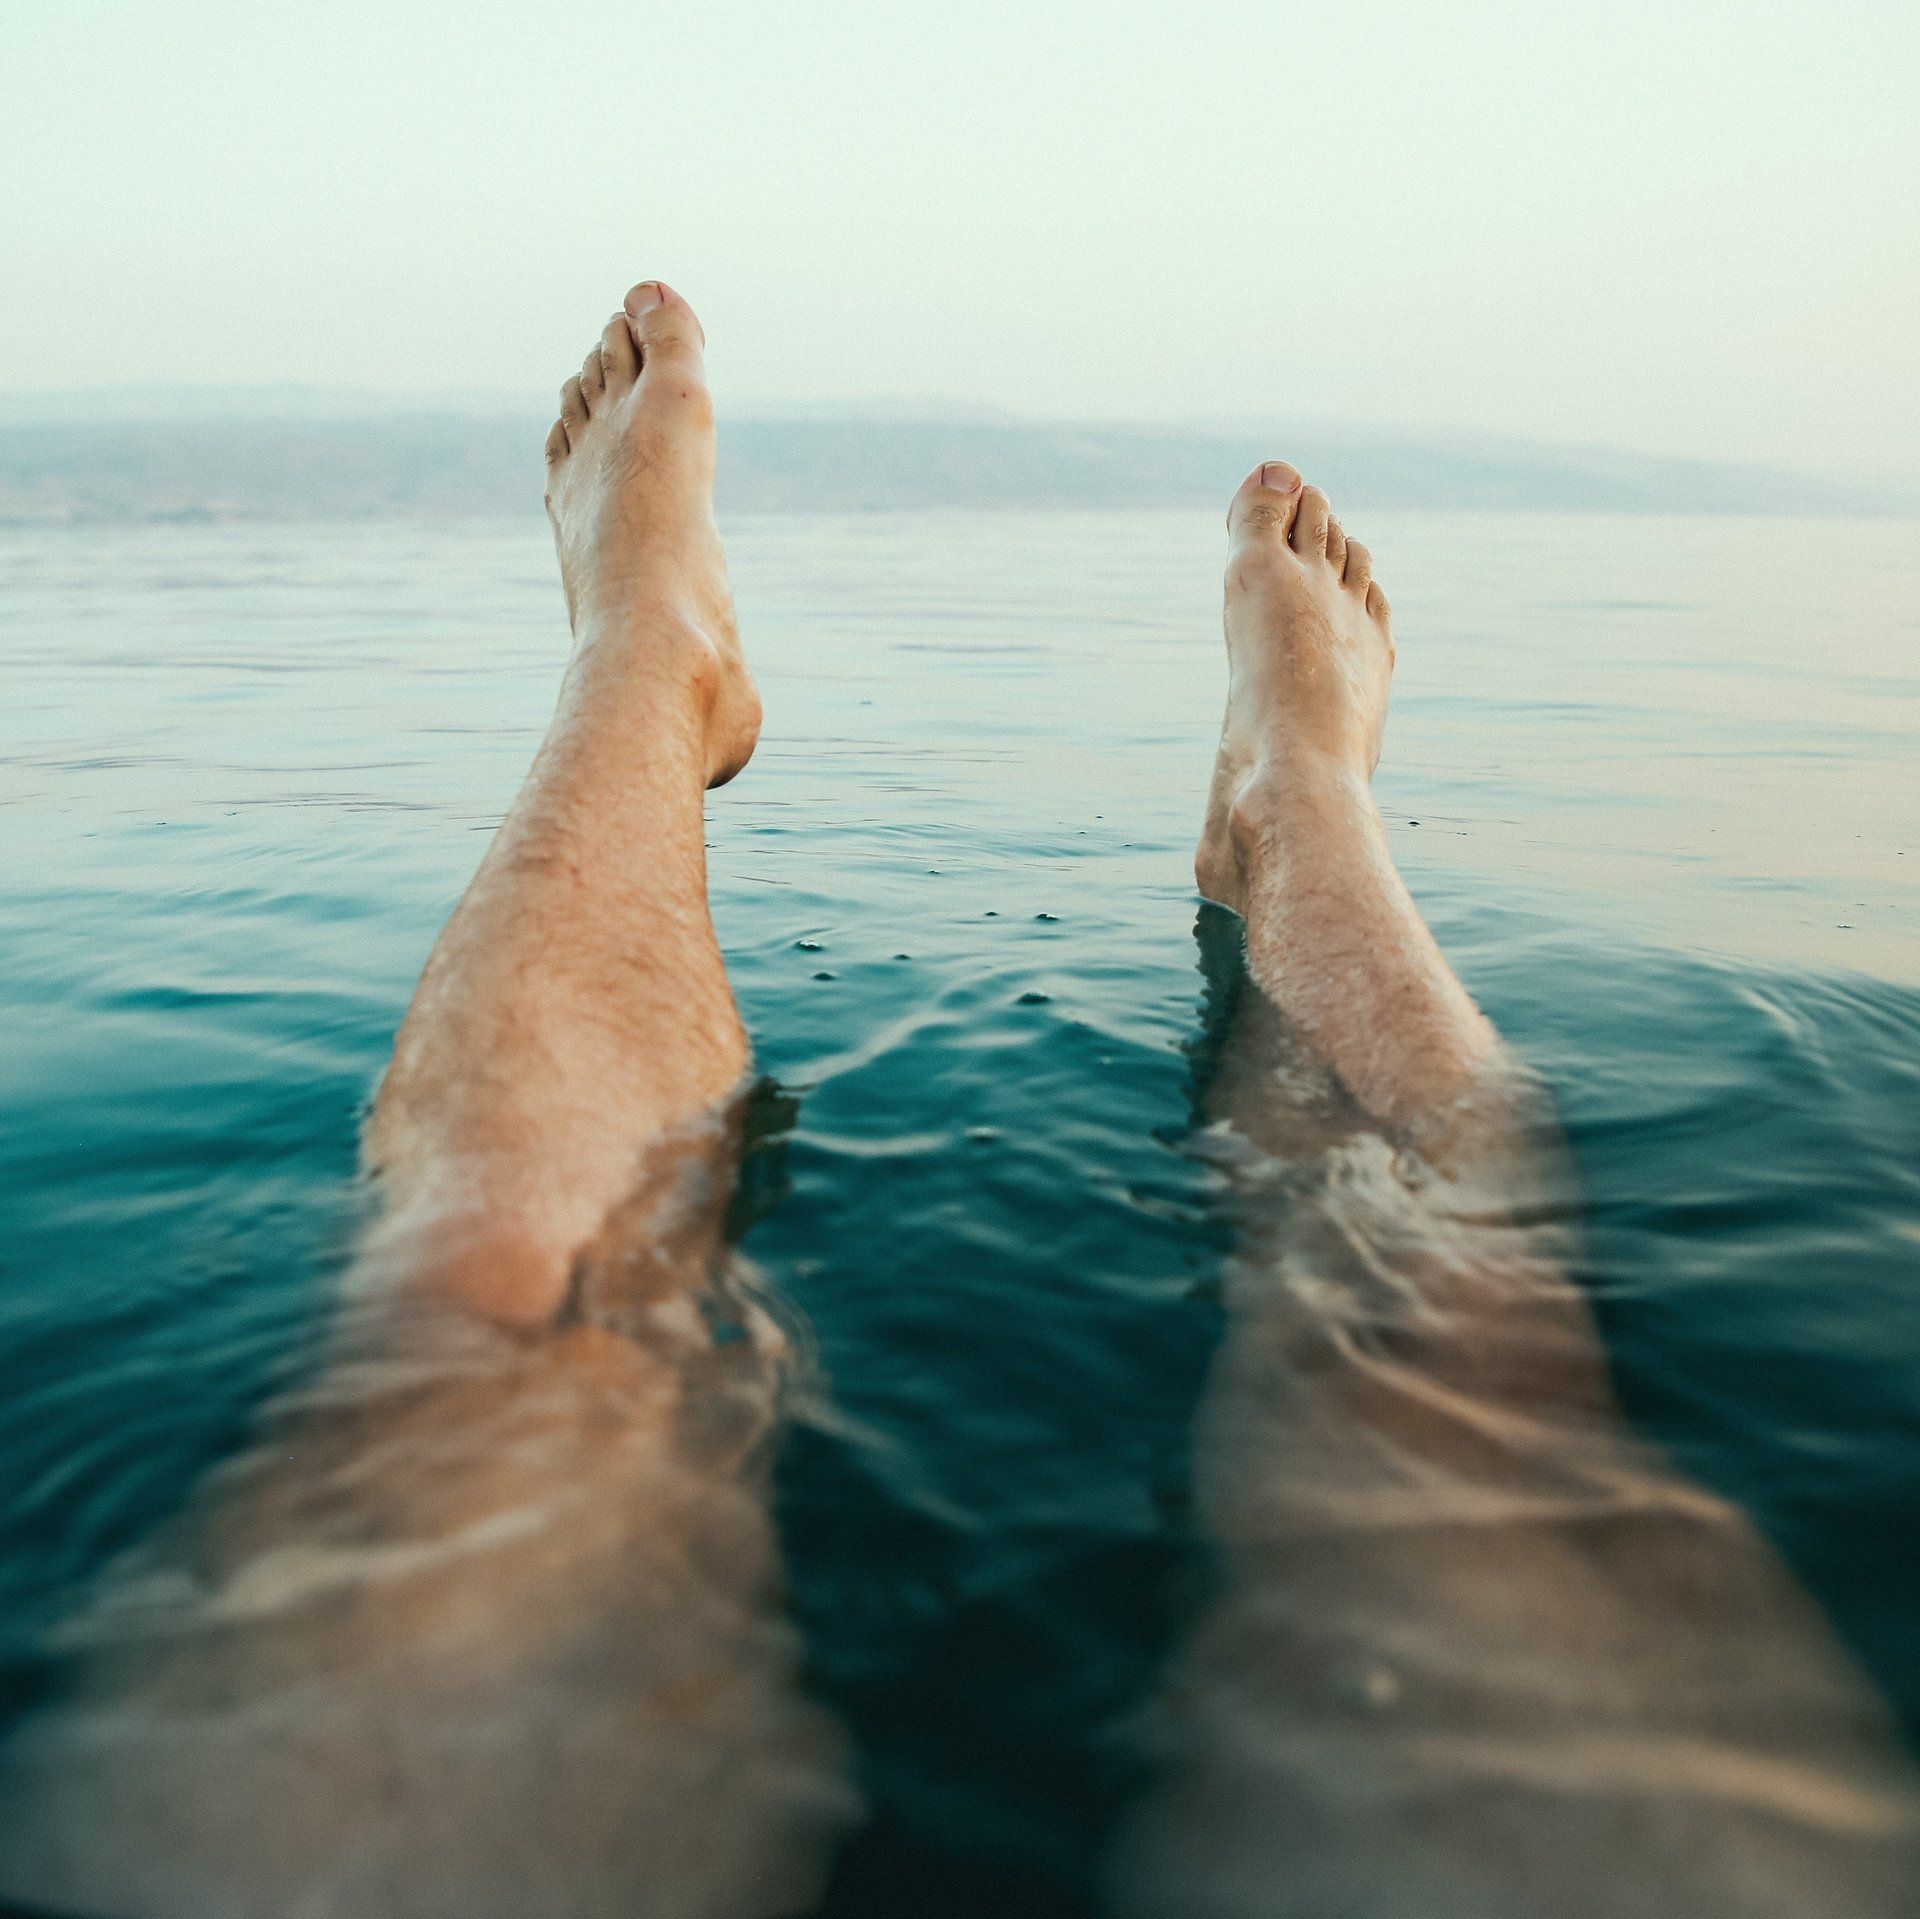 Point of view image of a swimmer looking down at their legs